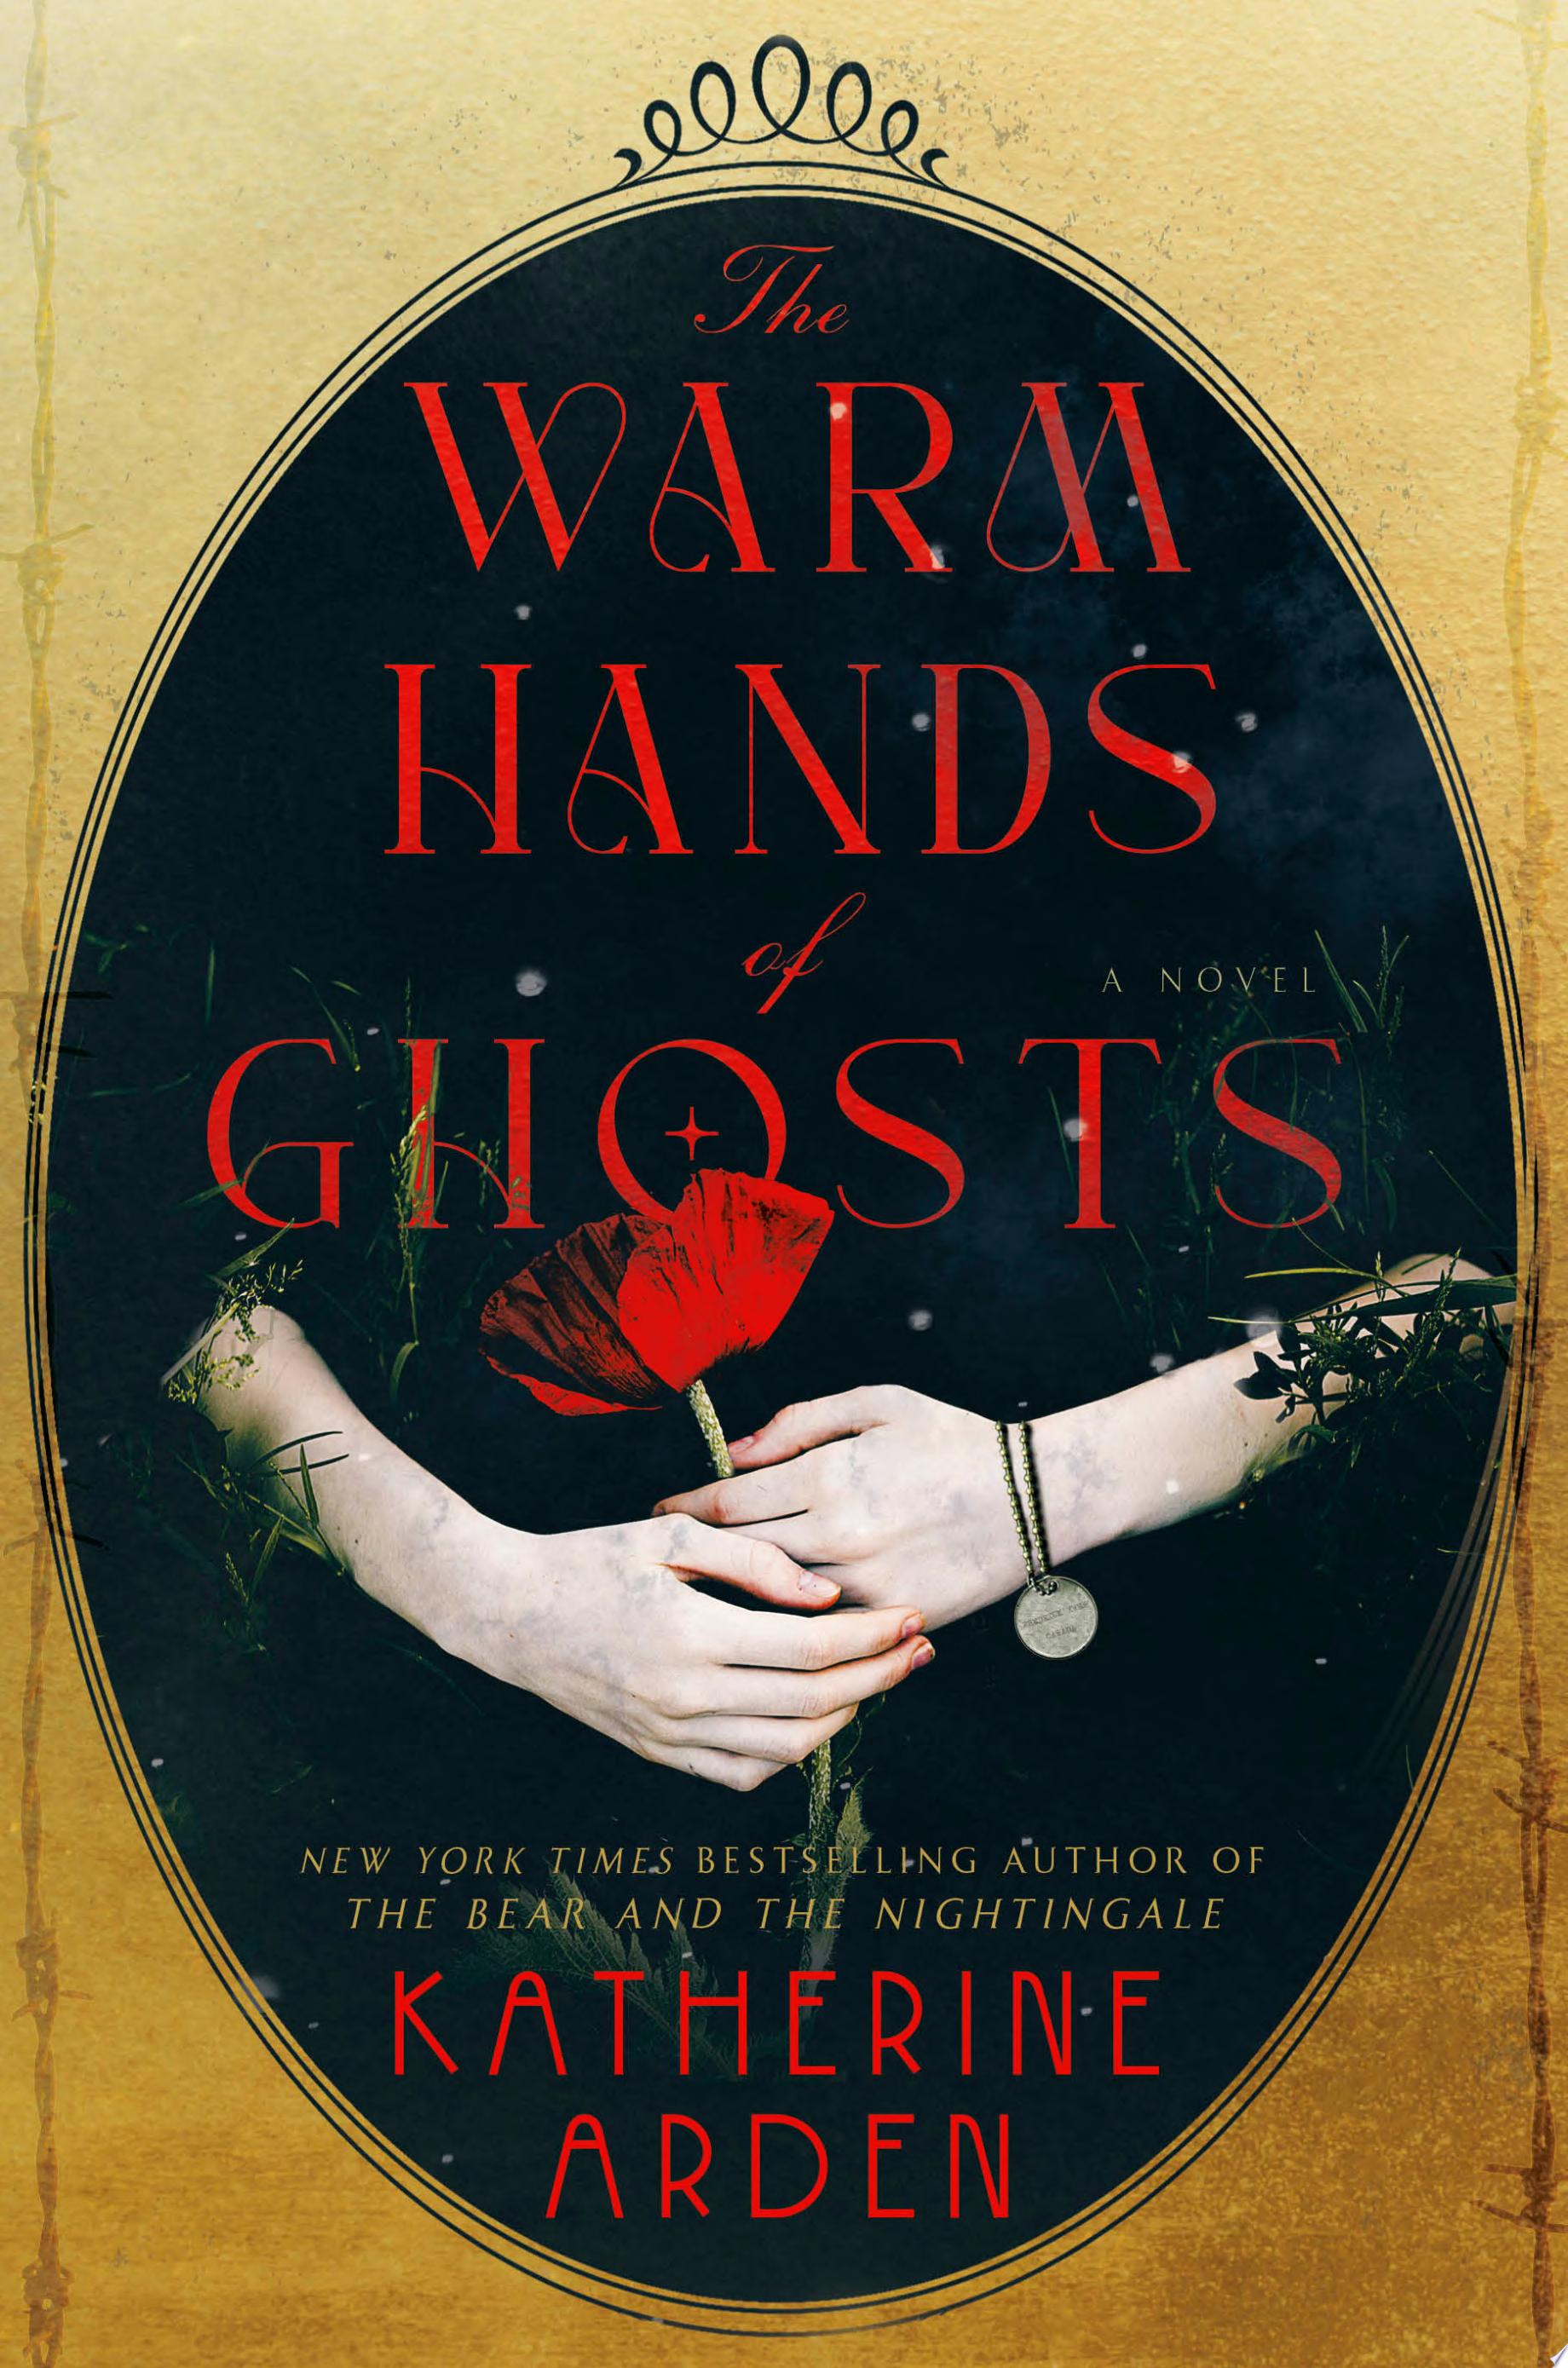 Image for "The Warm Hands of Ghosts"